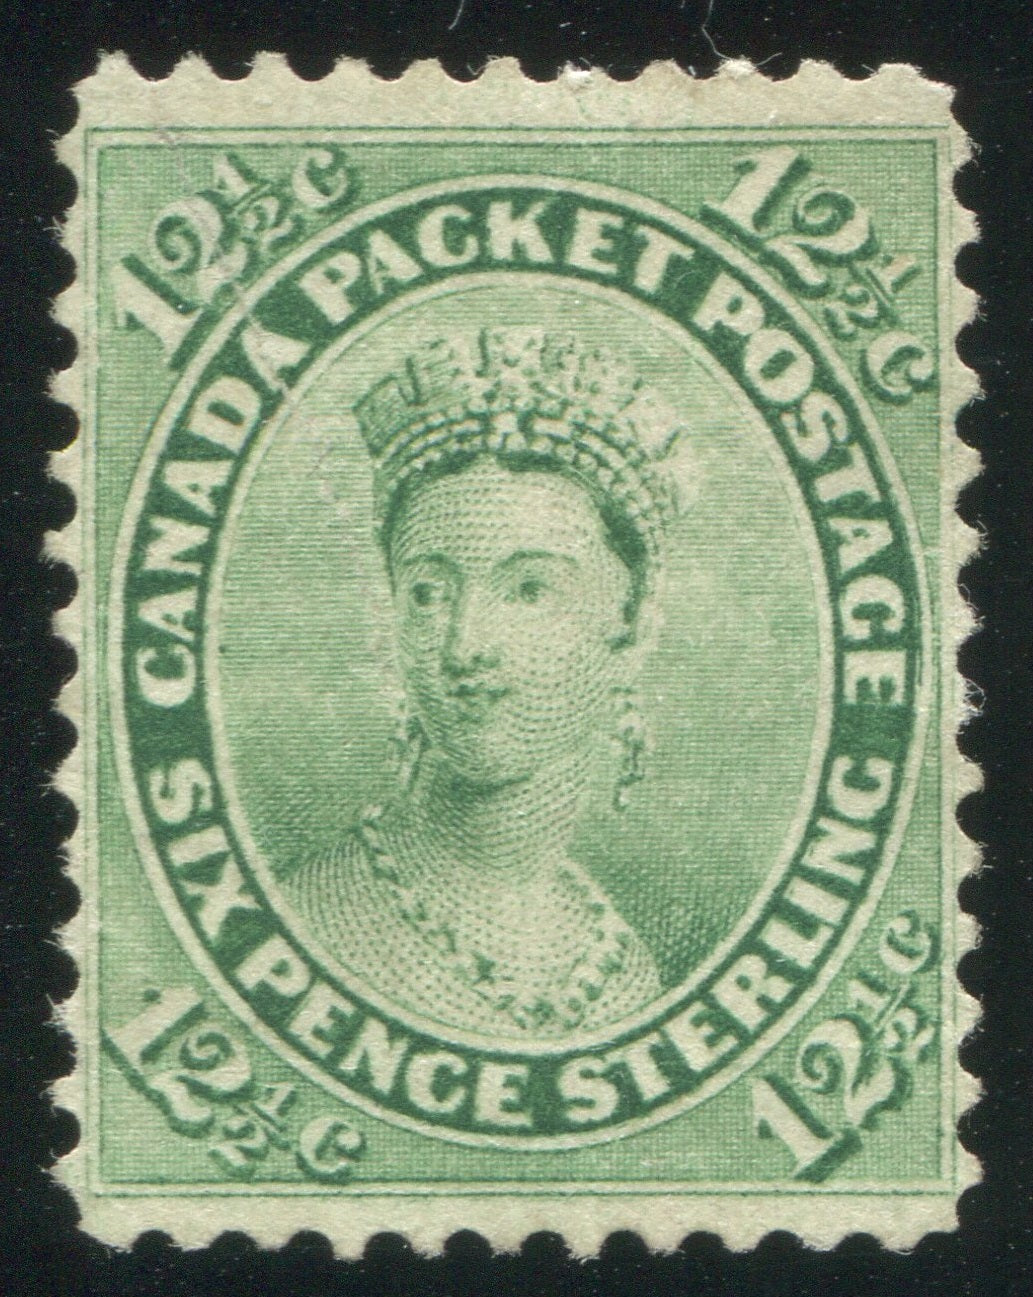 0018CA1905 - Canada #18iv - Mint Major Re-Entry